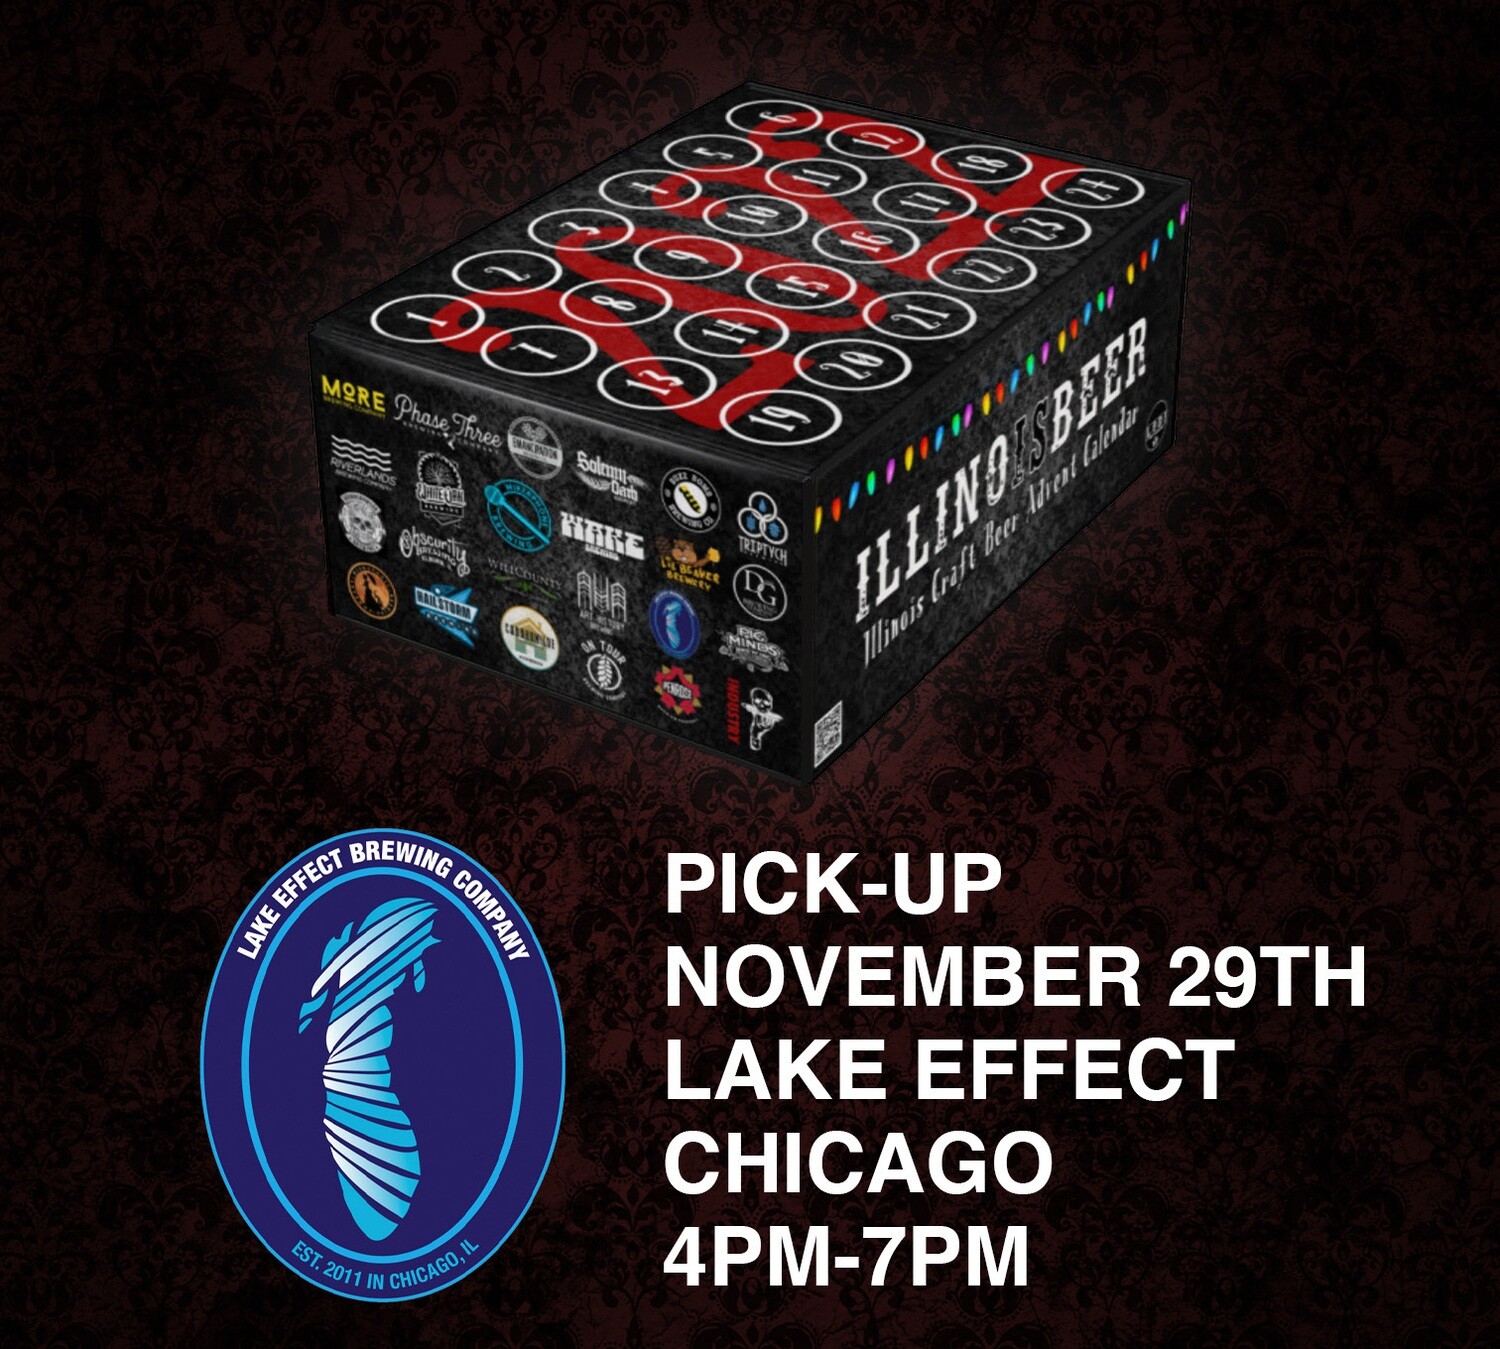 Pick Up 11/29 Chicago IL (Lake Effect Brewing) - 4PM to 7PM ILLINOISBEER Craft Beer Advent Calendar